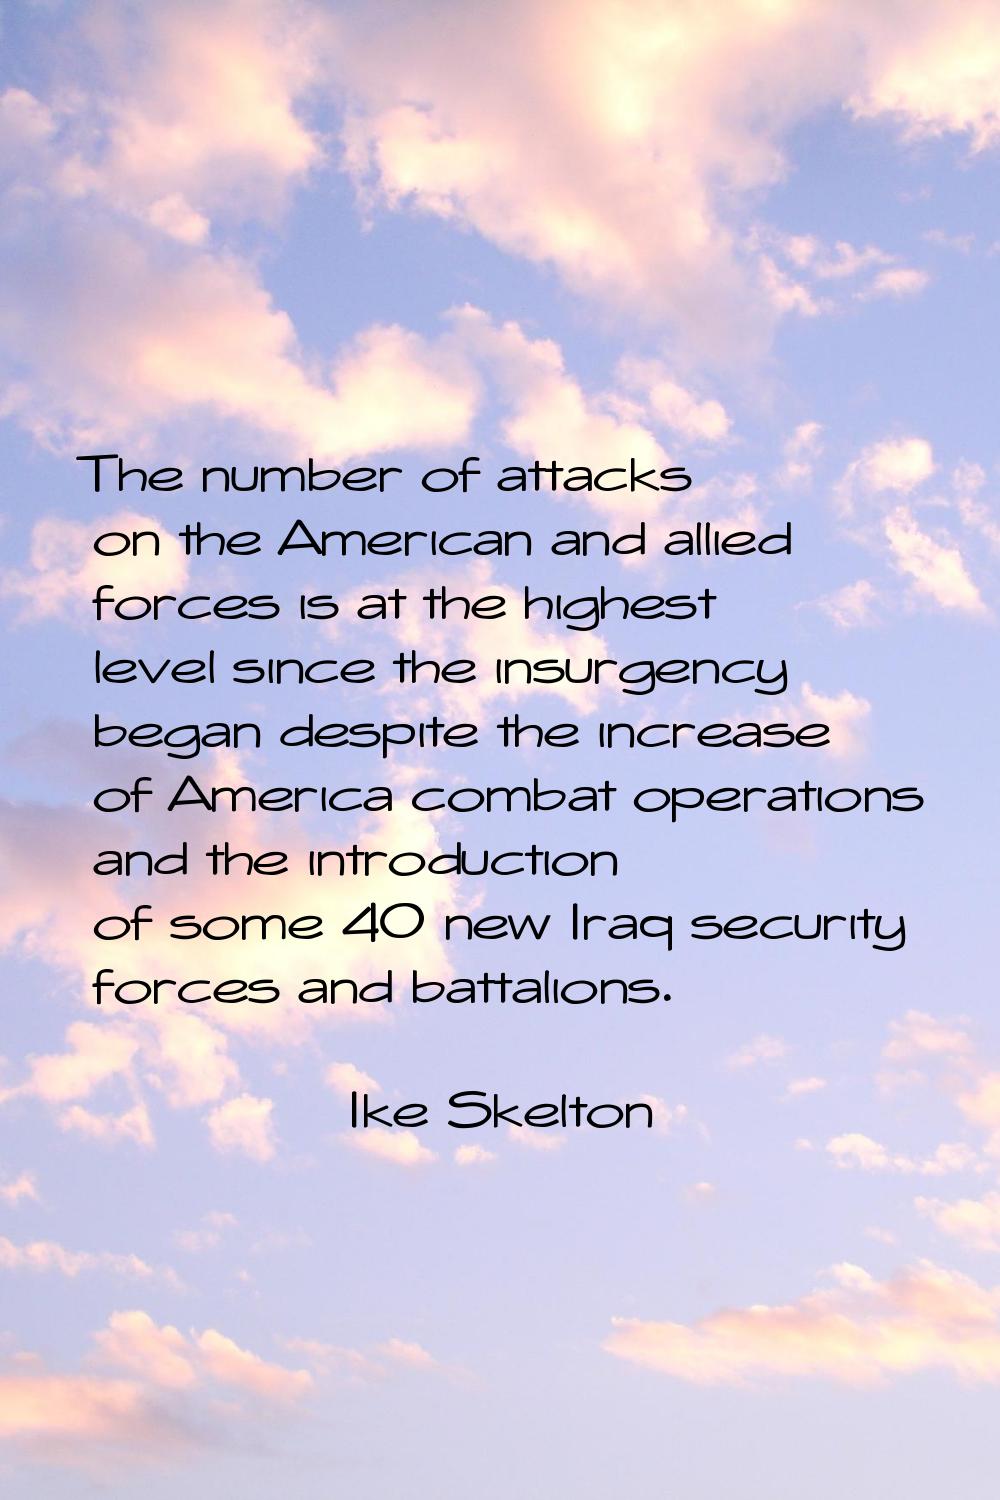 The number of attacks on the American and allied forces is at the highest level since the insurgenc